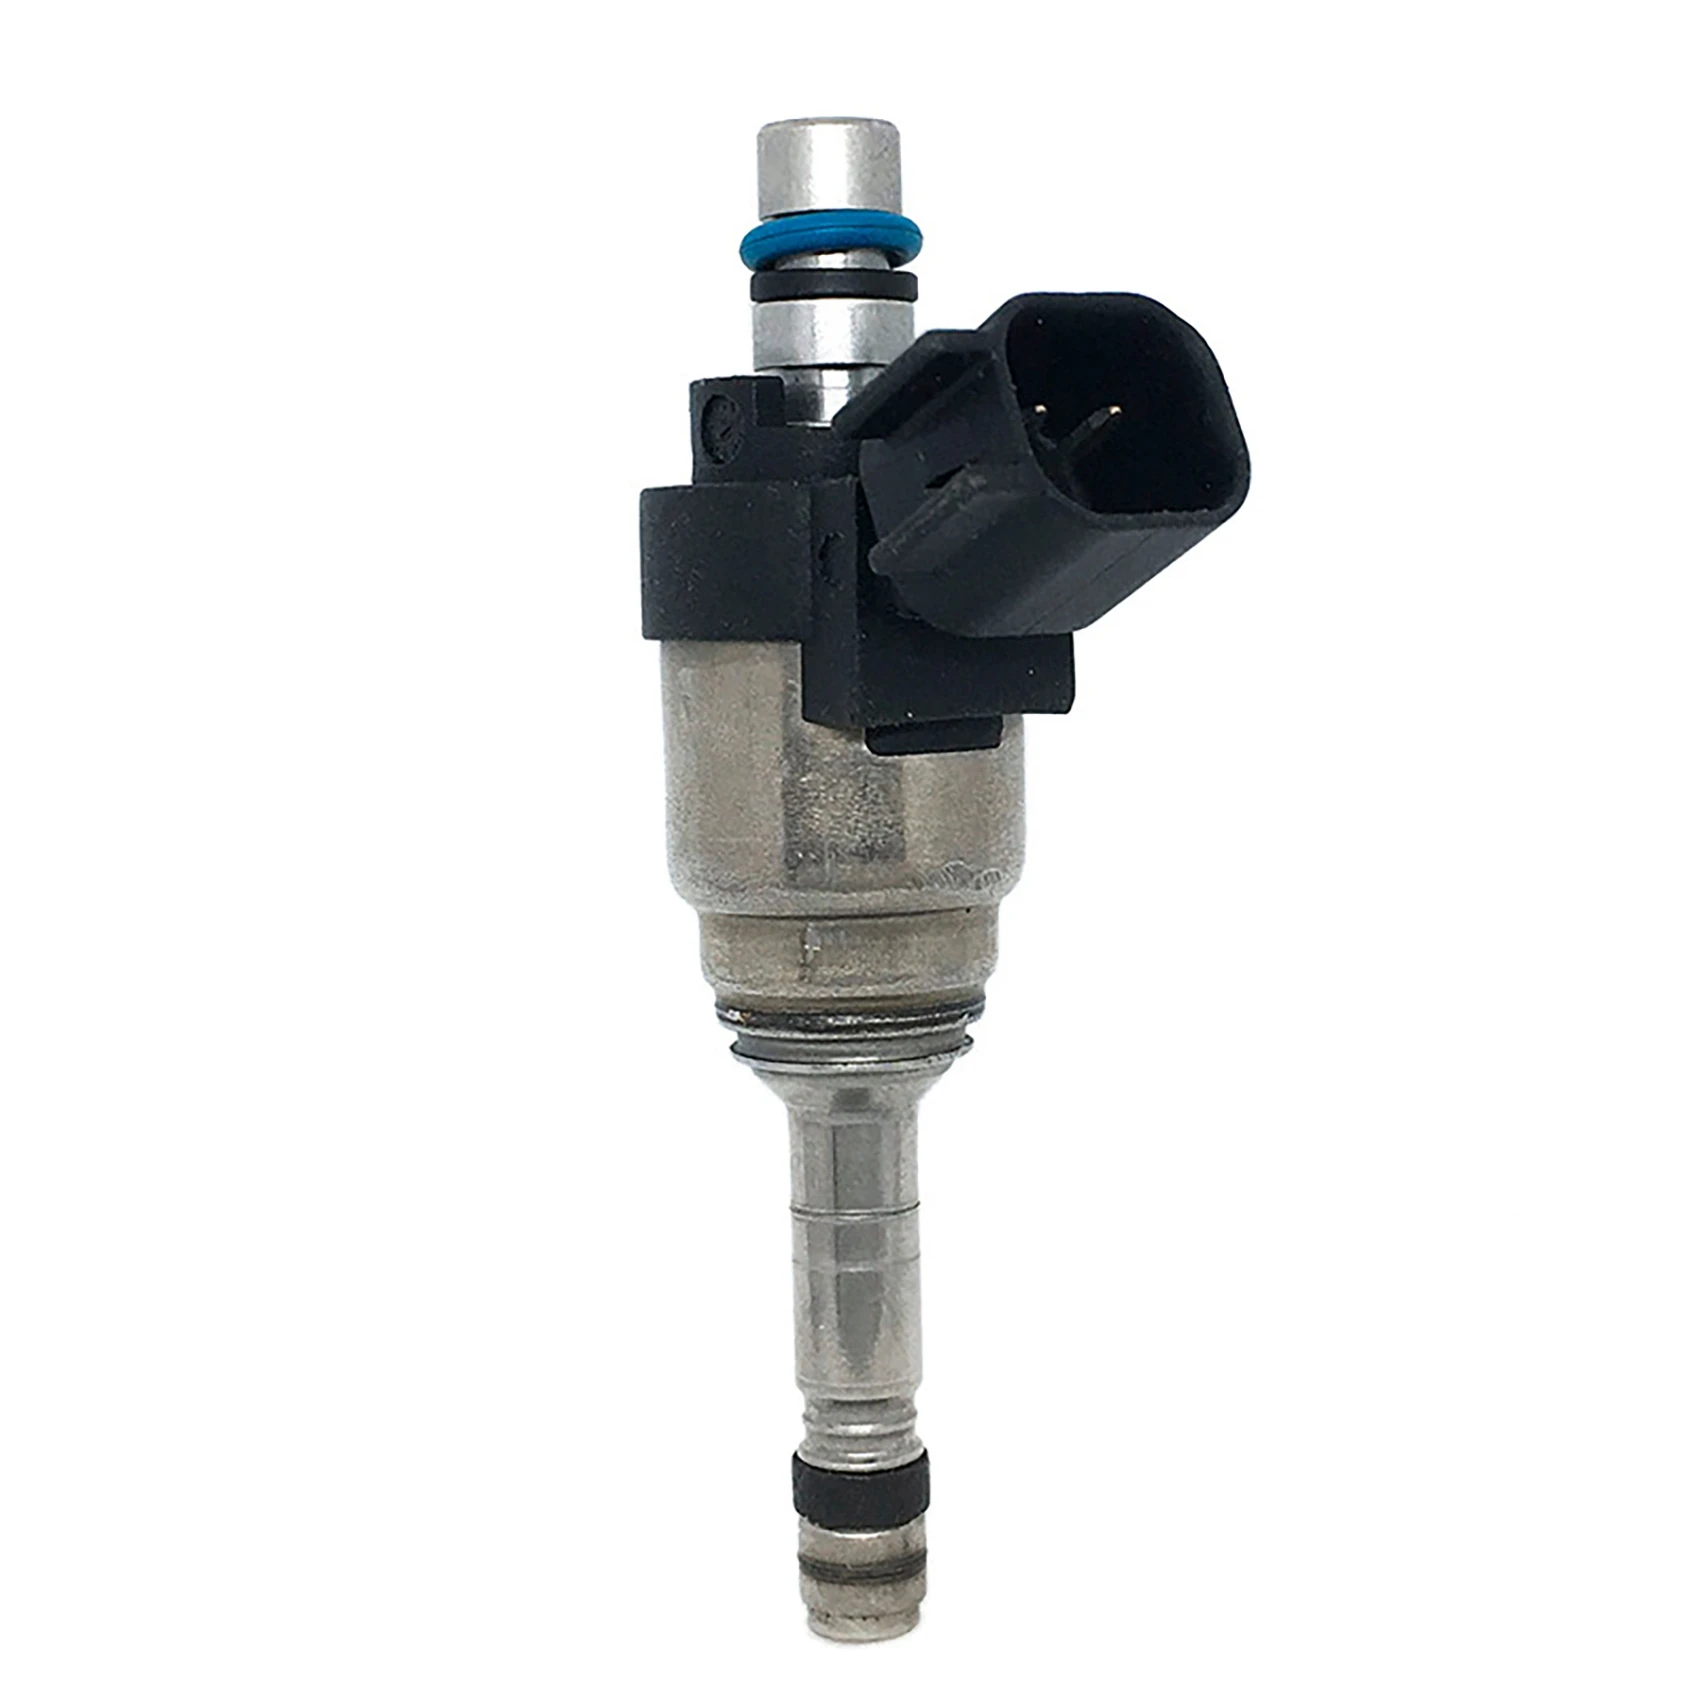 

35310-3C550 Fuel Injector Compatible with for Hyundai Azera 3.8L V6 Genesis 3.8L V6 Replaces Part